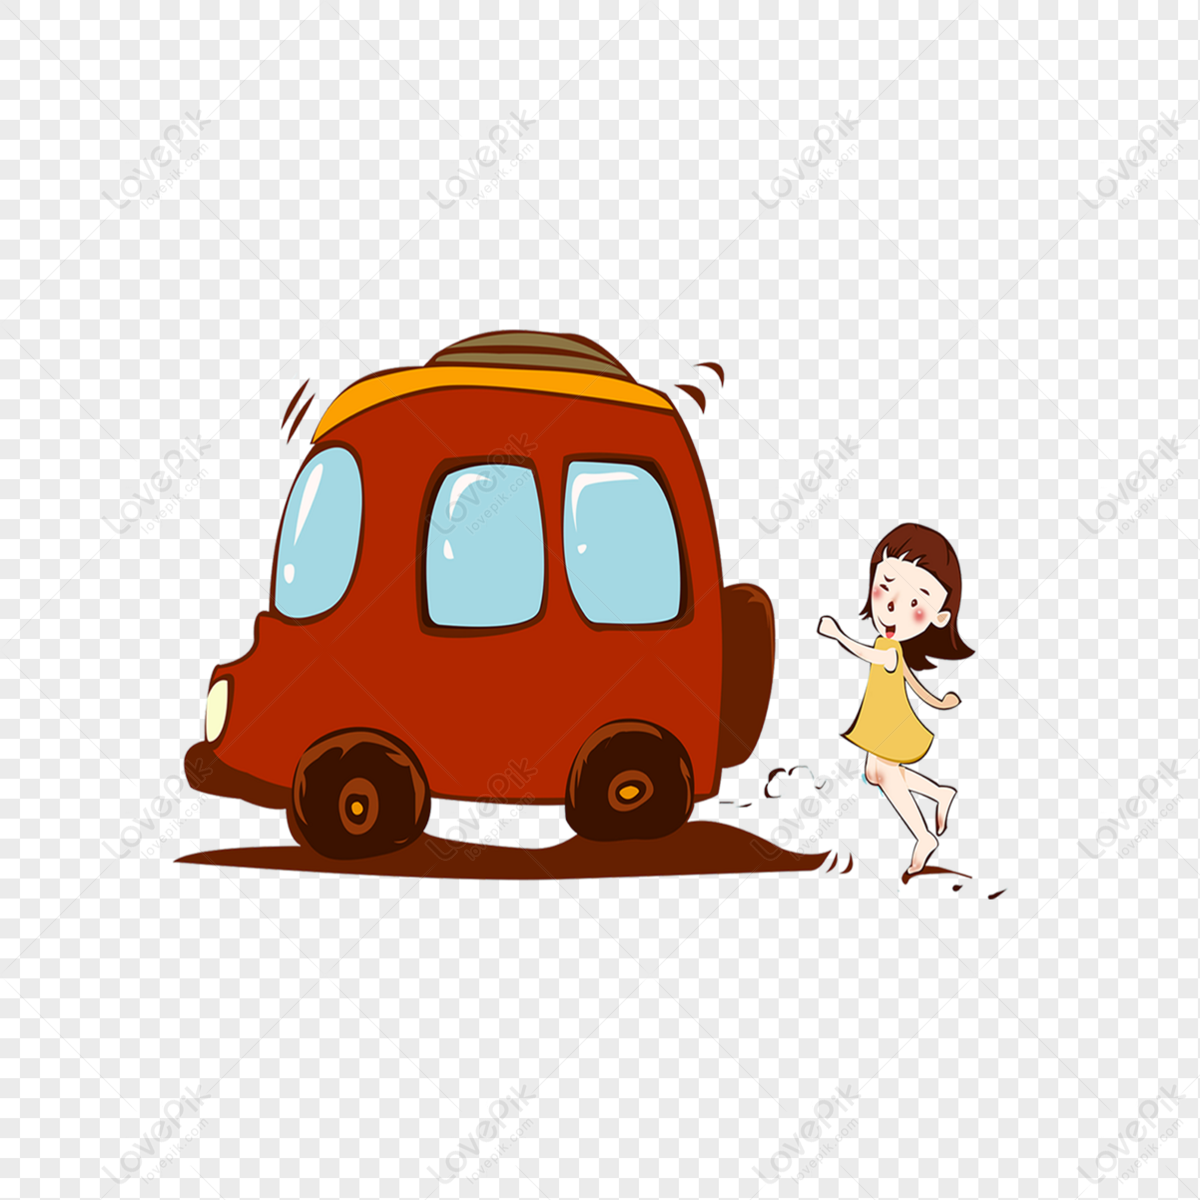 A Girl Driving A Car PNG Hd Transparent Image And Clipart Image For Free  Download - Lovepik | 400495594